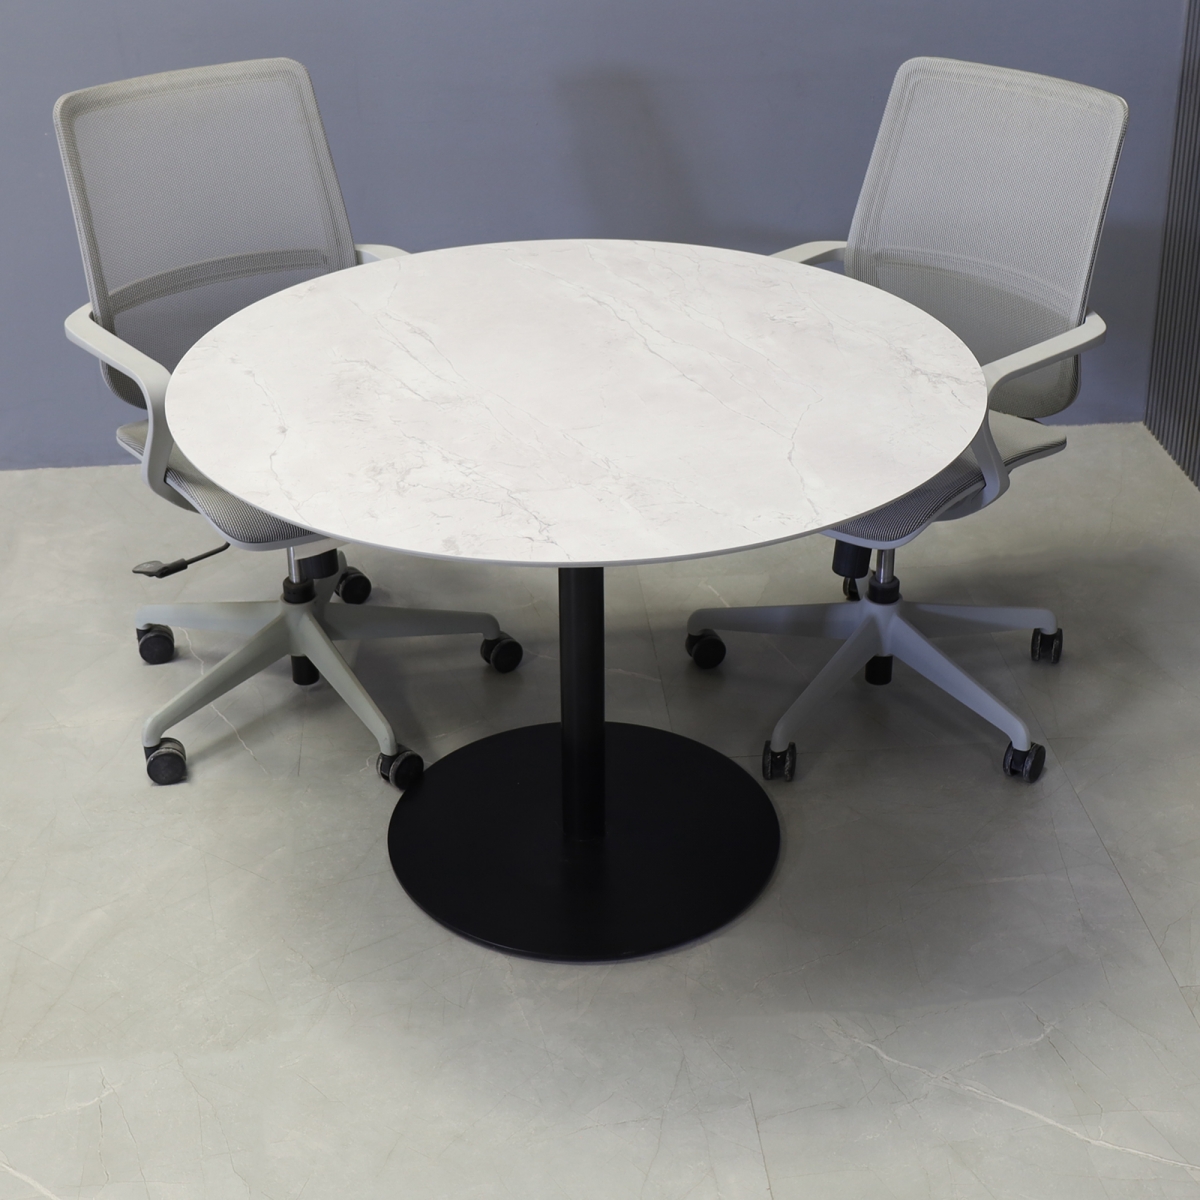 California Round Conference Table in Sterling Calcutta Engineered Stone Top - 42 In. - Stock #83